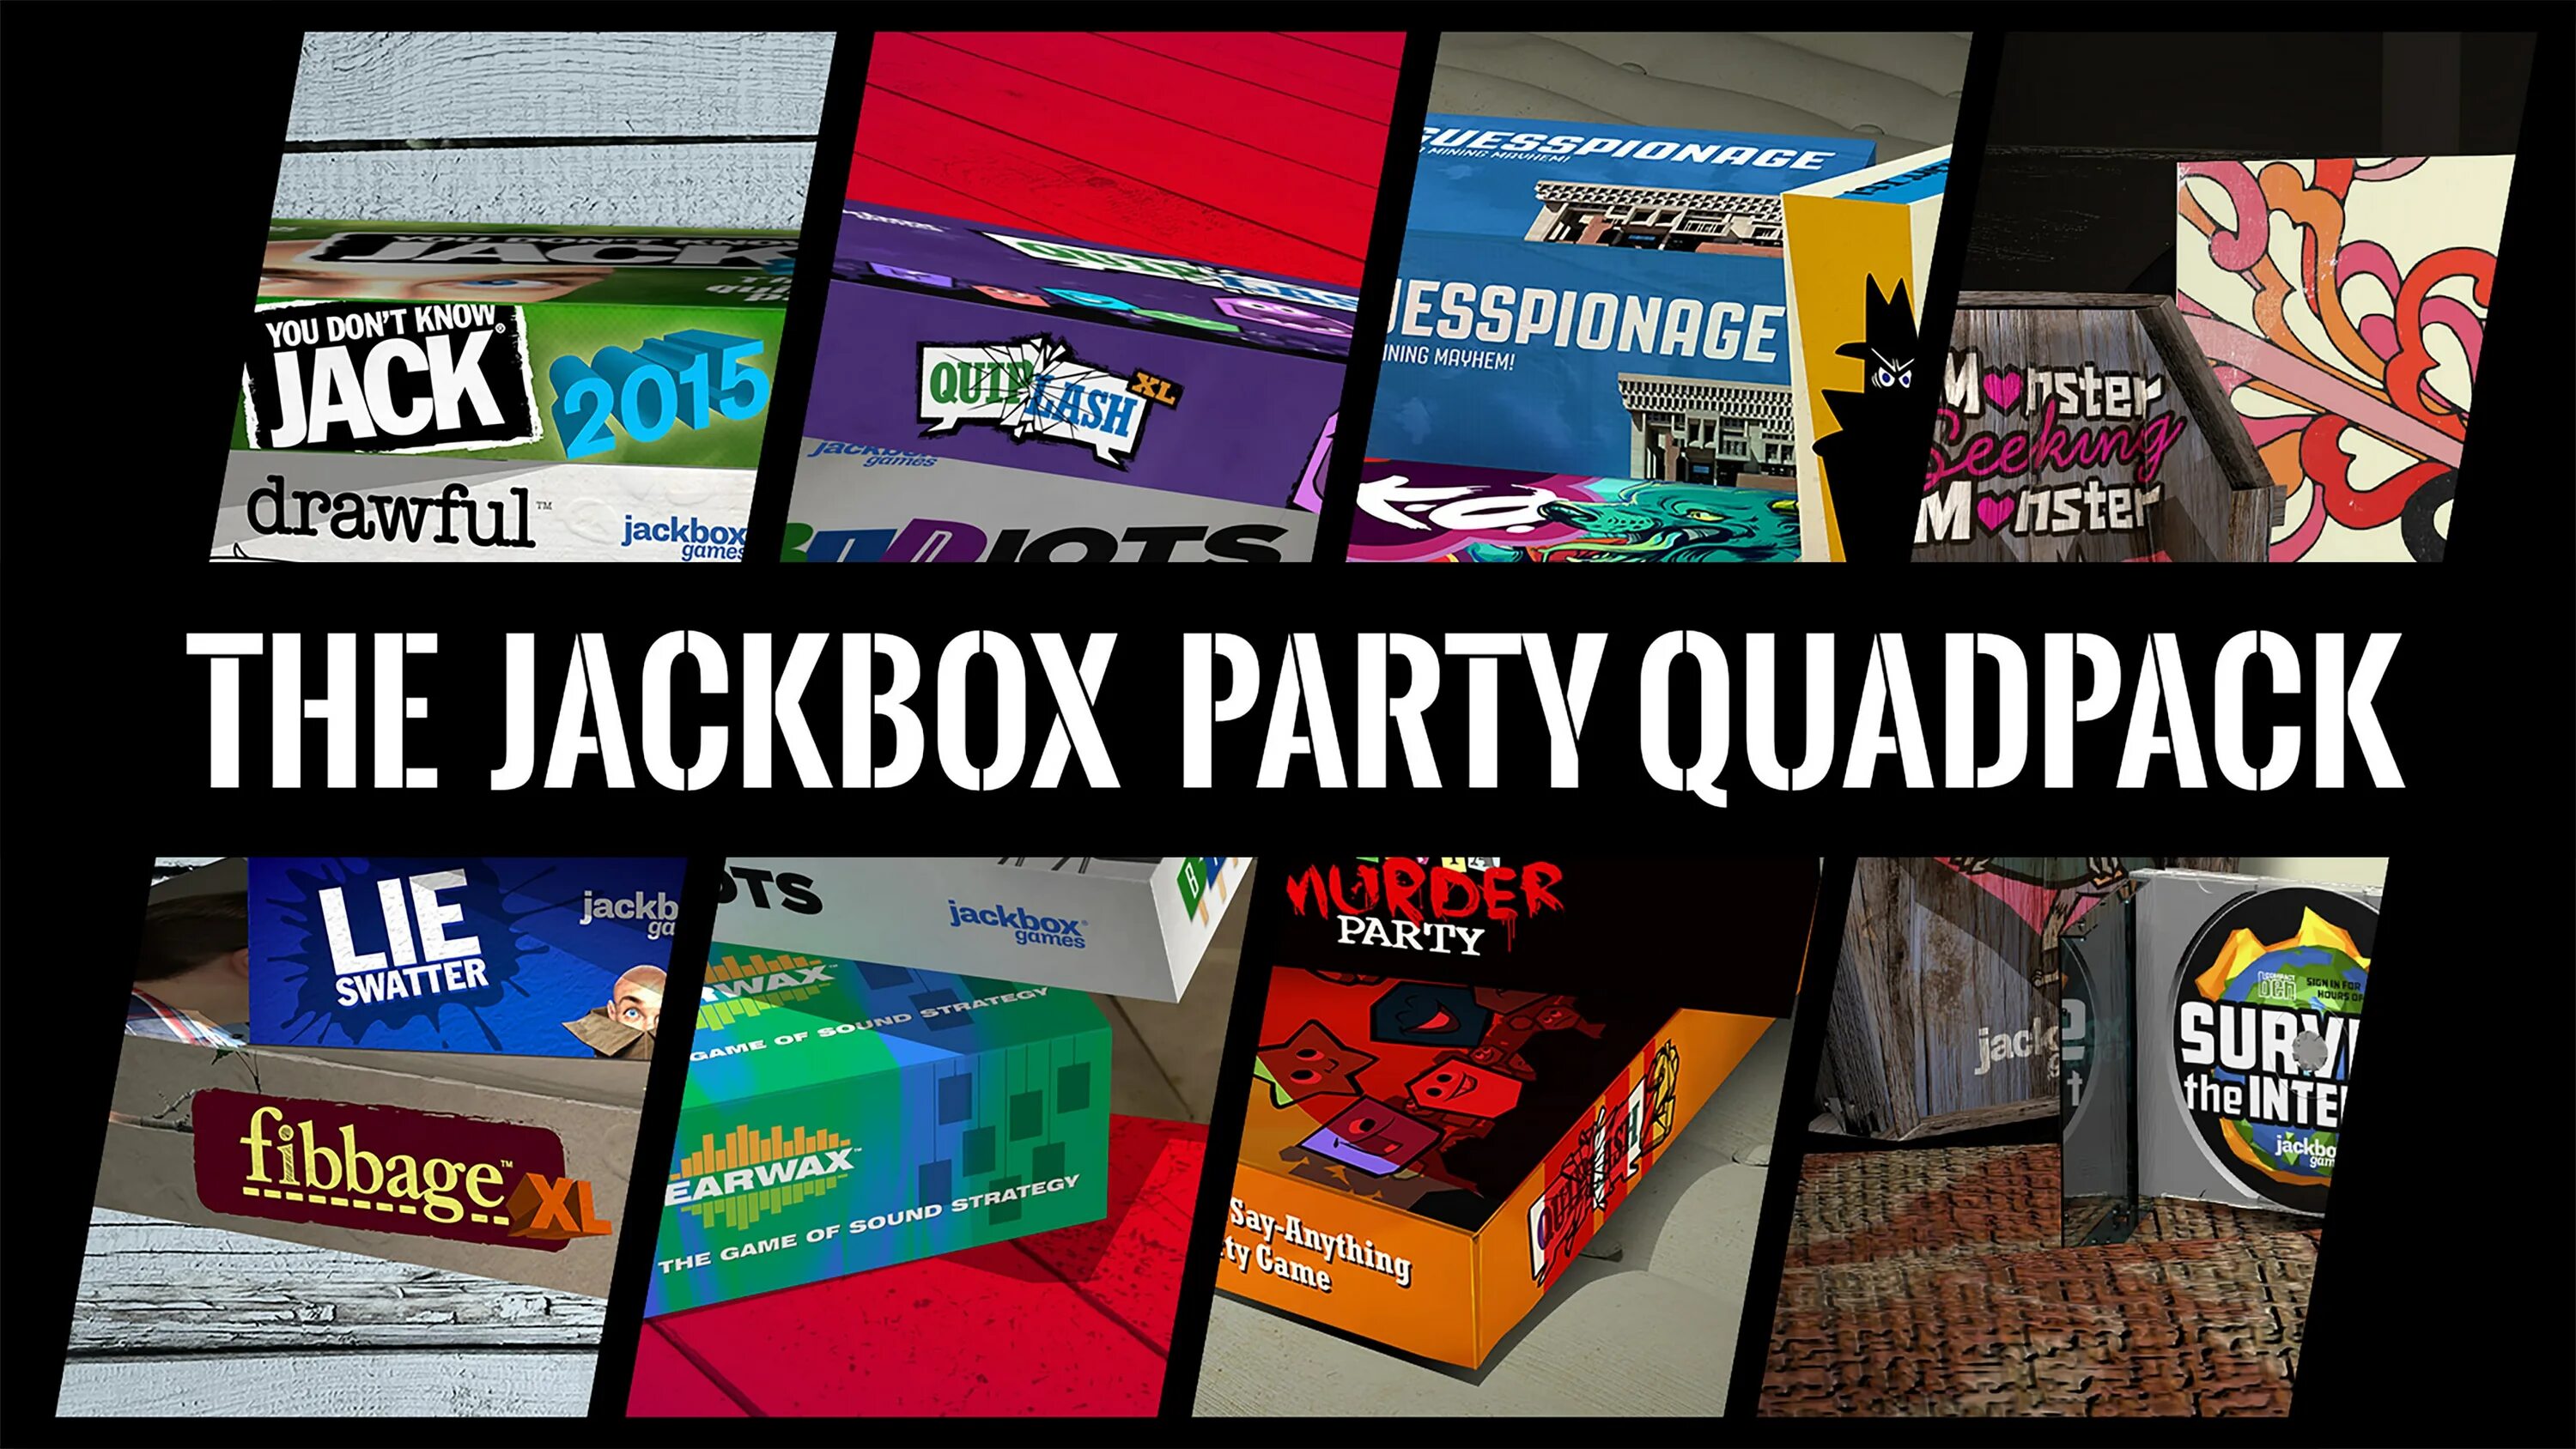 Диск на Xbox one Jackbox Party Pack 3. The Jackbox Party Pack 5. The Jackbox Party Pack 4. The Jackbox Party Quadpack. Jackbox starter